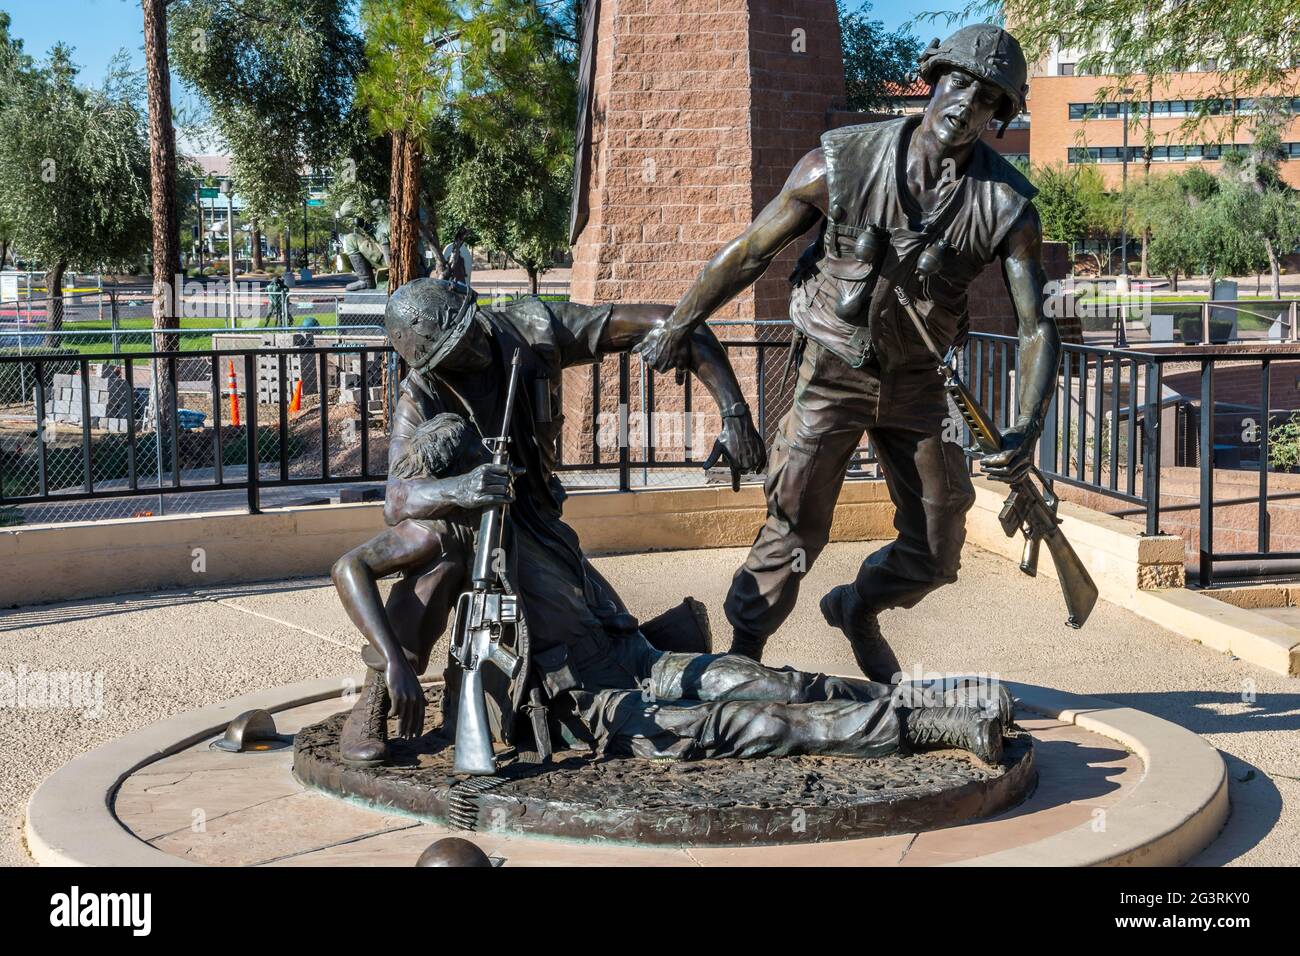 A colossal sculpture group of undying valor in Phoenix, Arizona Stock Photo